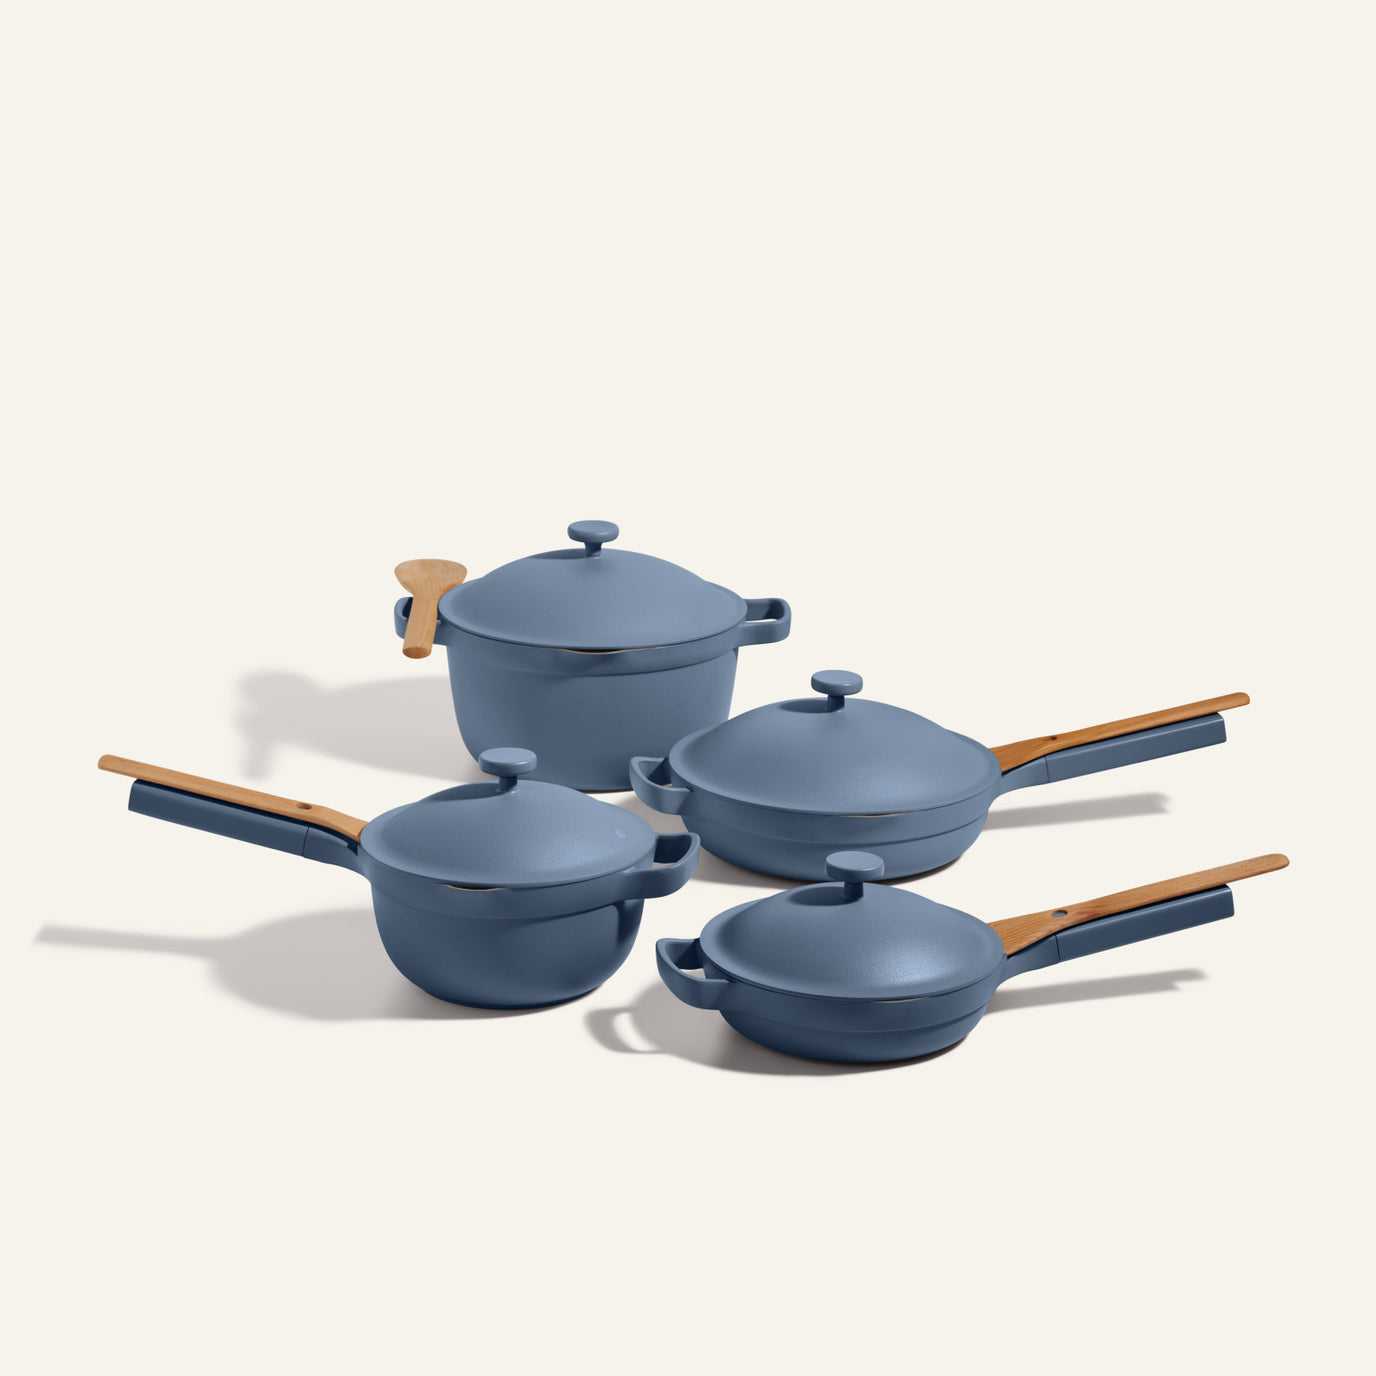 Our Place Cookware Set